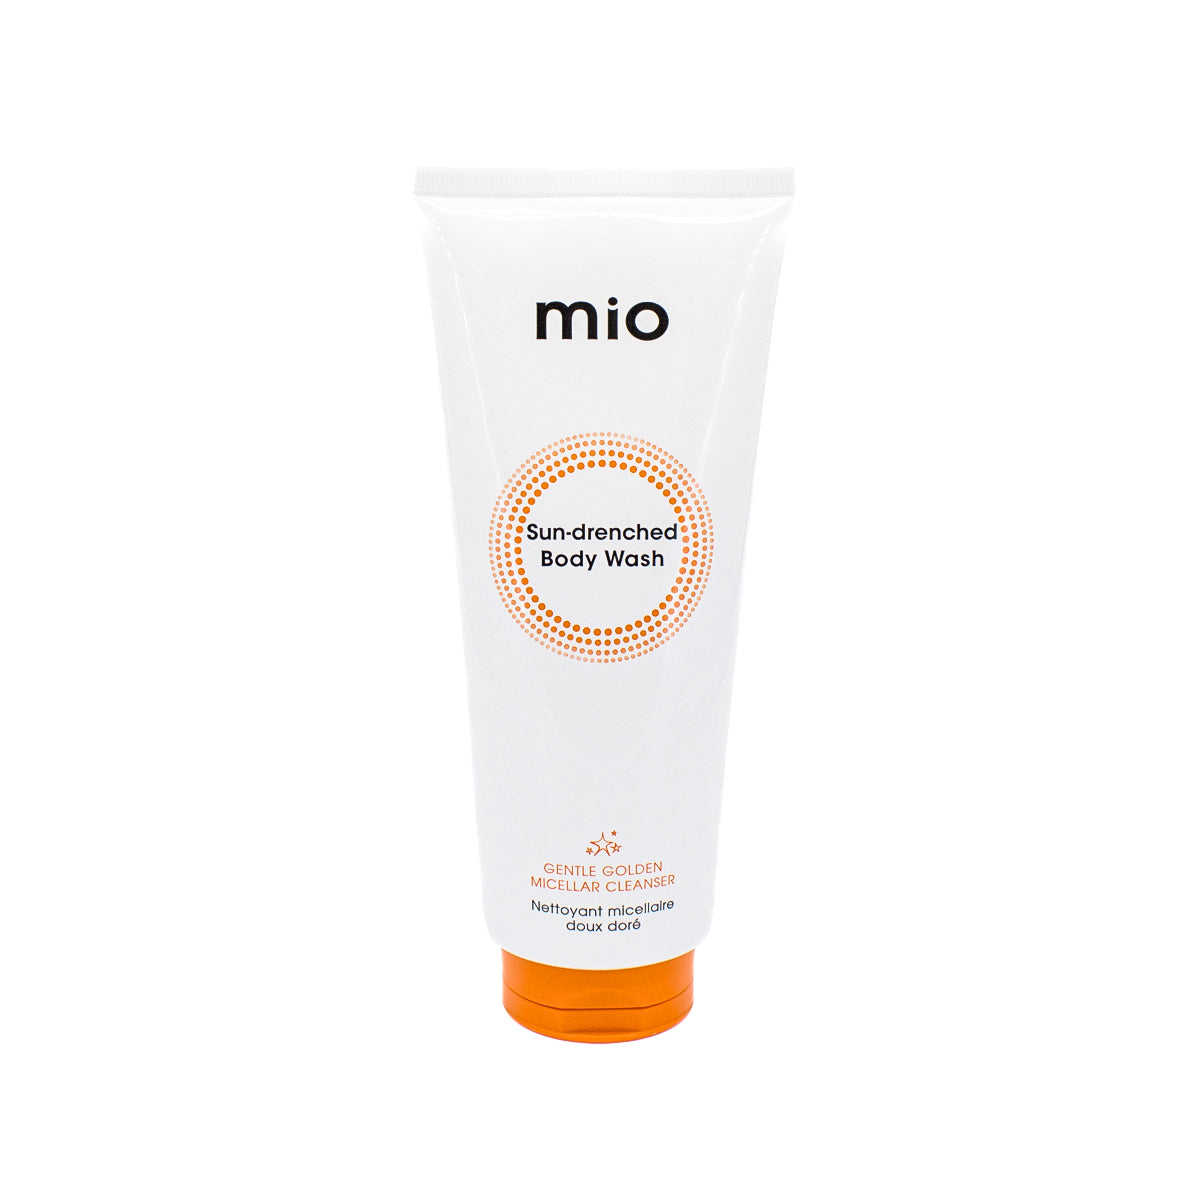 mio Sun-drenched Body Wash 6.7oz - Small Amount Missing